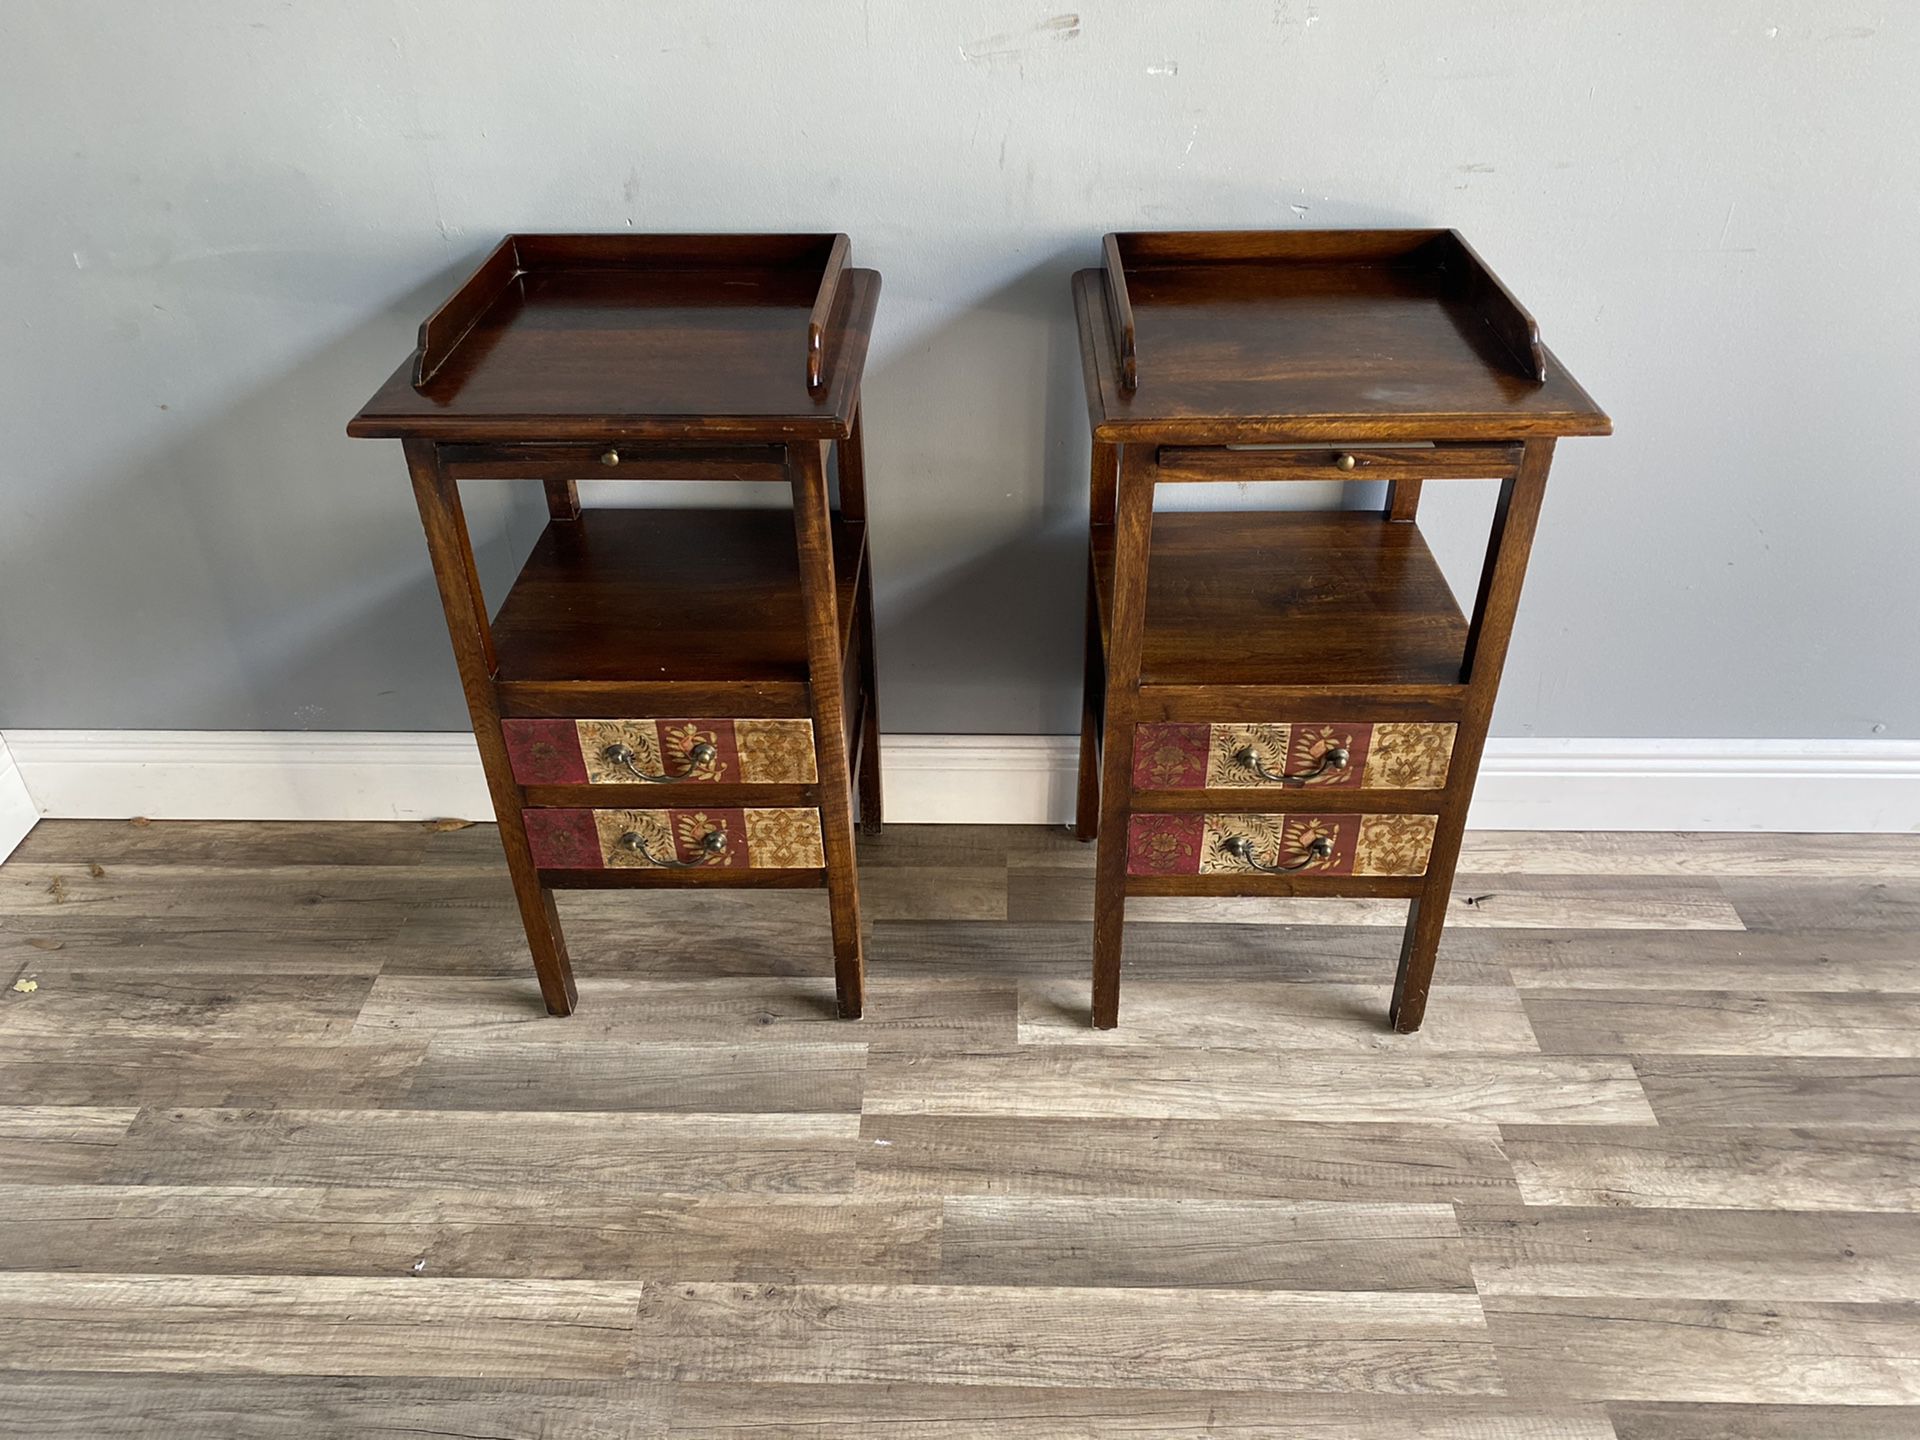 16x29x15 2 Solid Wood Nightstands Small Tall Side Tables With 2 Drawers & Shelf W/ Pull Out Tray *WE ACCEPT CREDIT CARDS* *DELIVERY